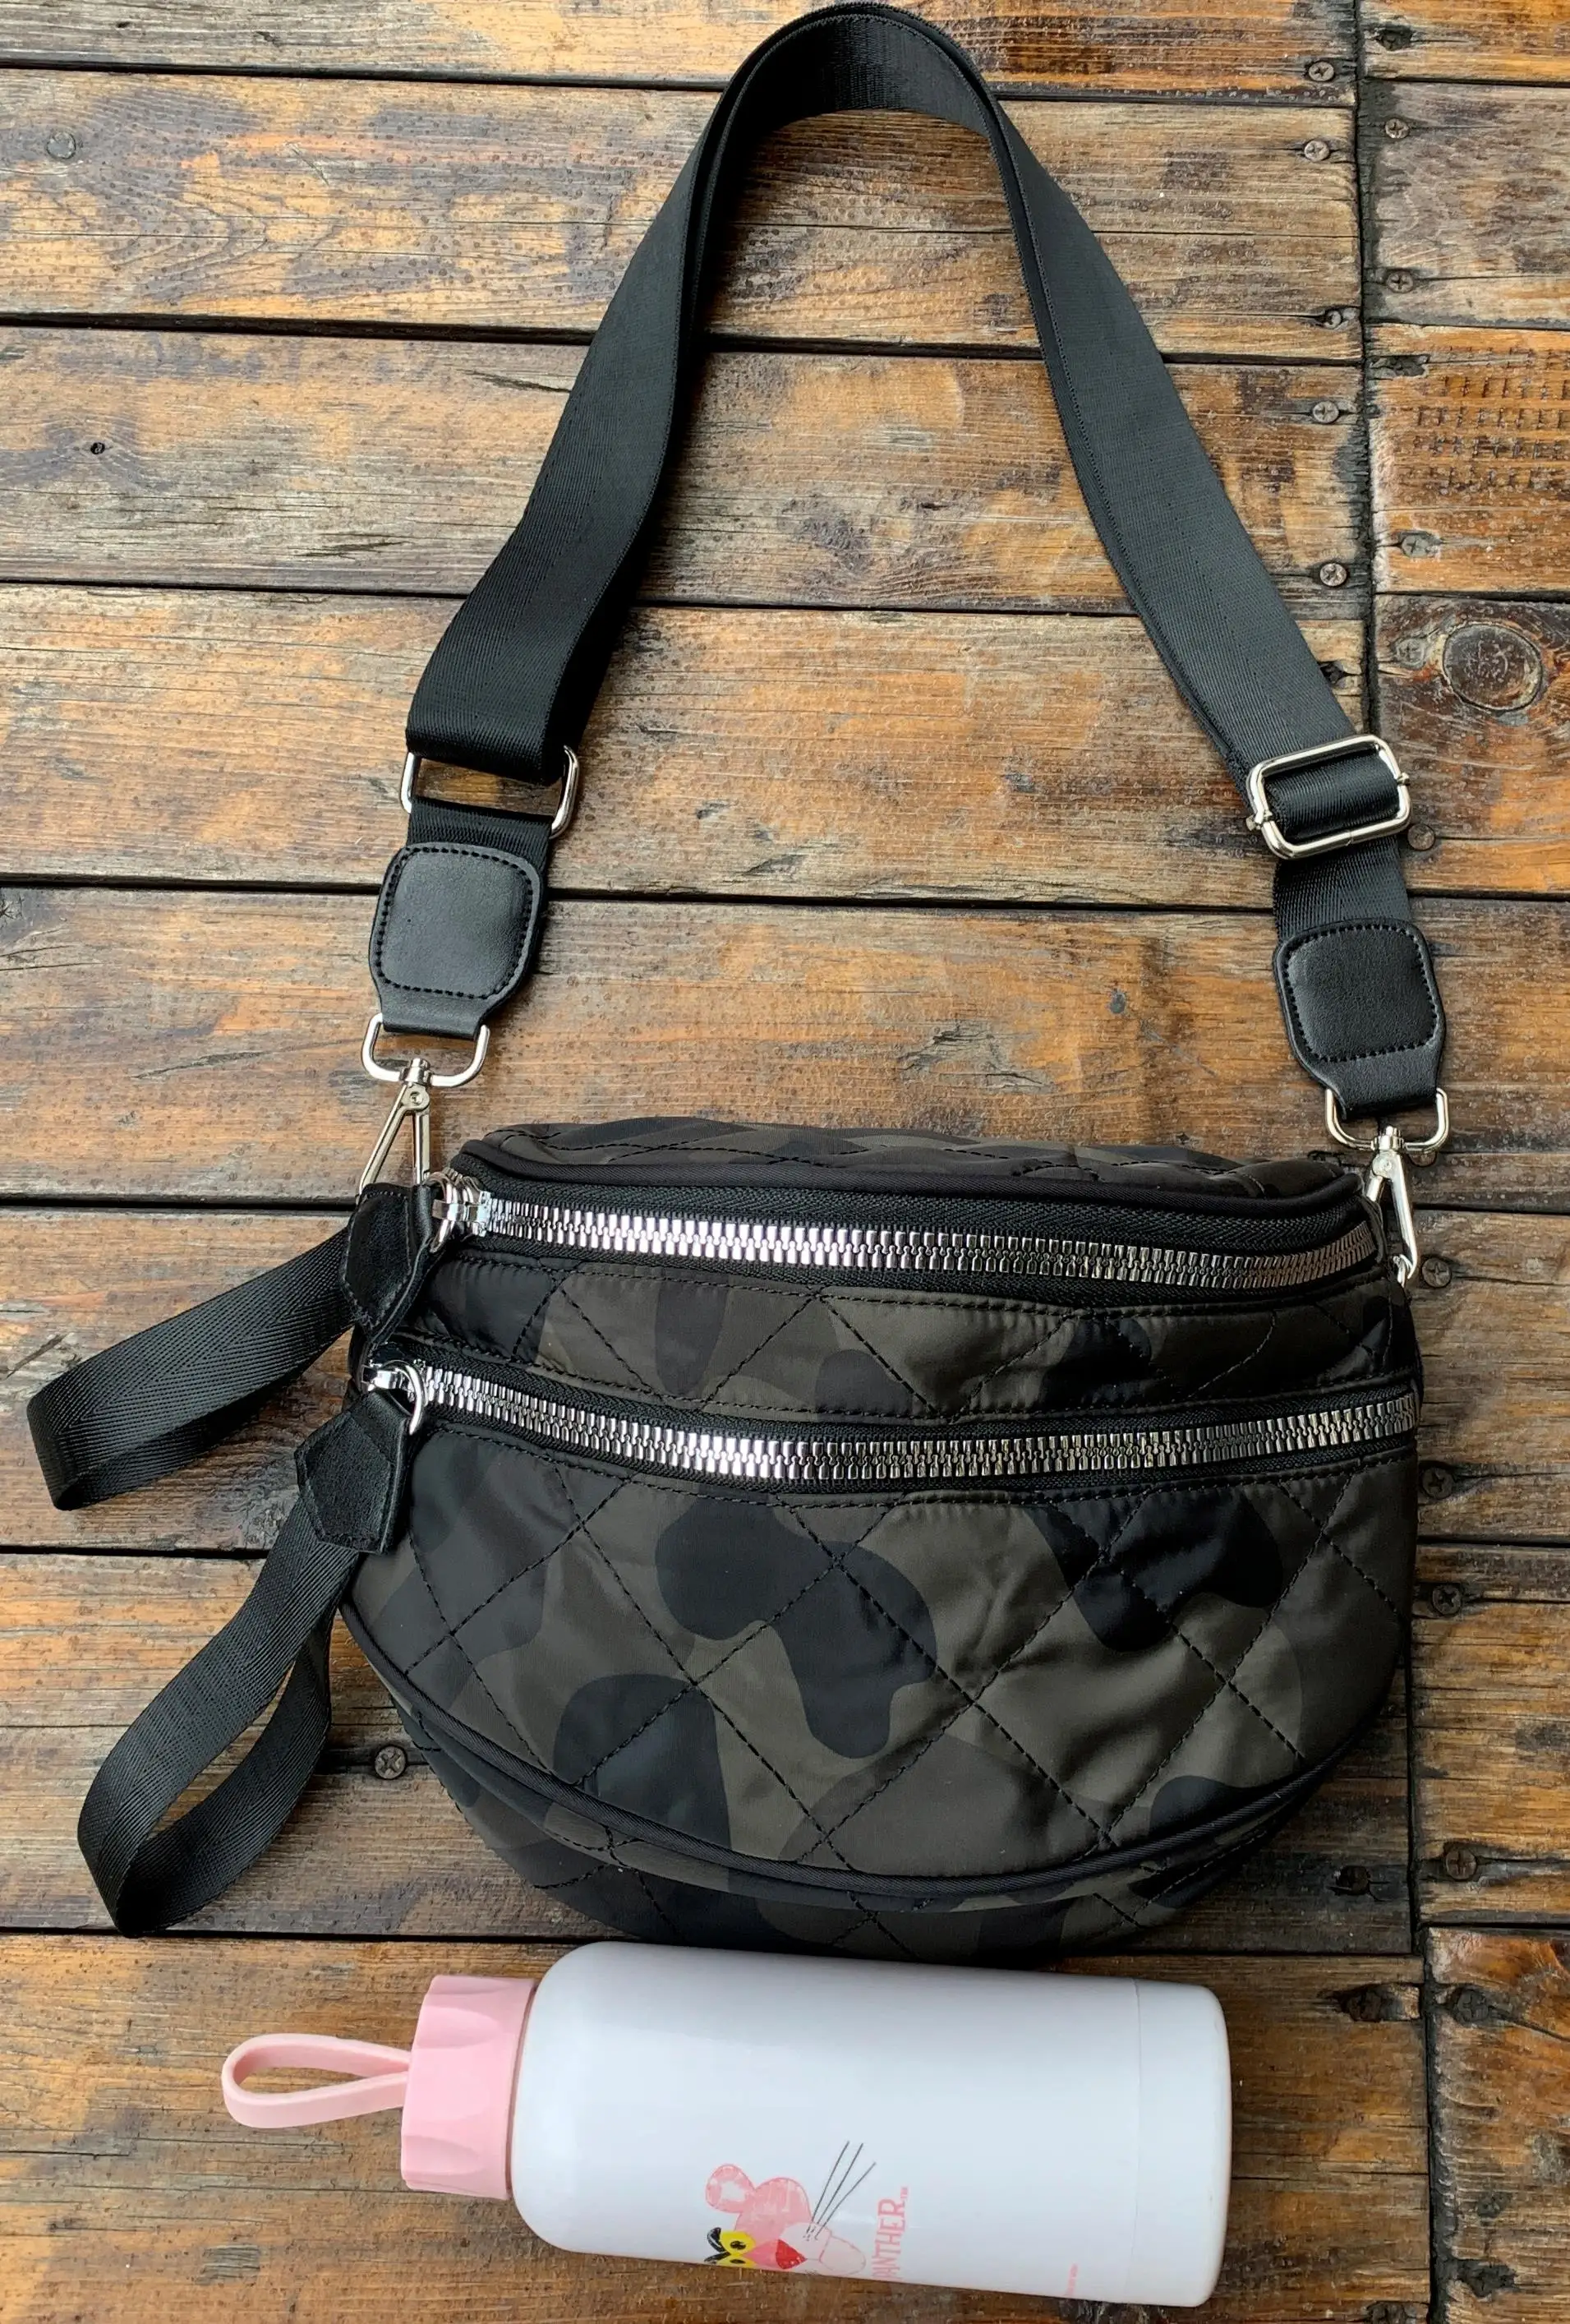 Women's Bags expensive. 2022 New Arrival Camo Chest Bags For Female High Quality Splashproof Nylon Shoulder Bags Sport  Travelling Cycling Hiking evening bags